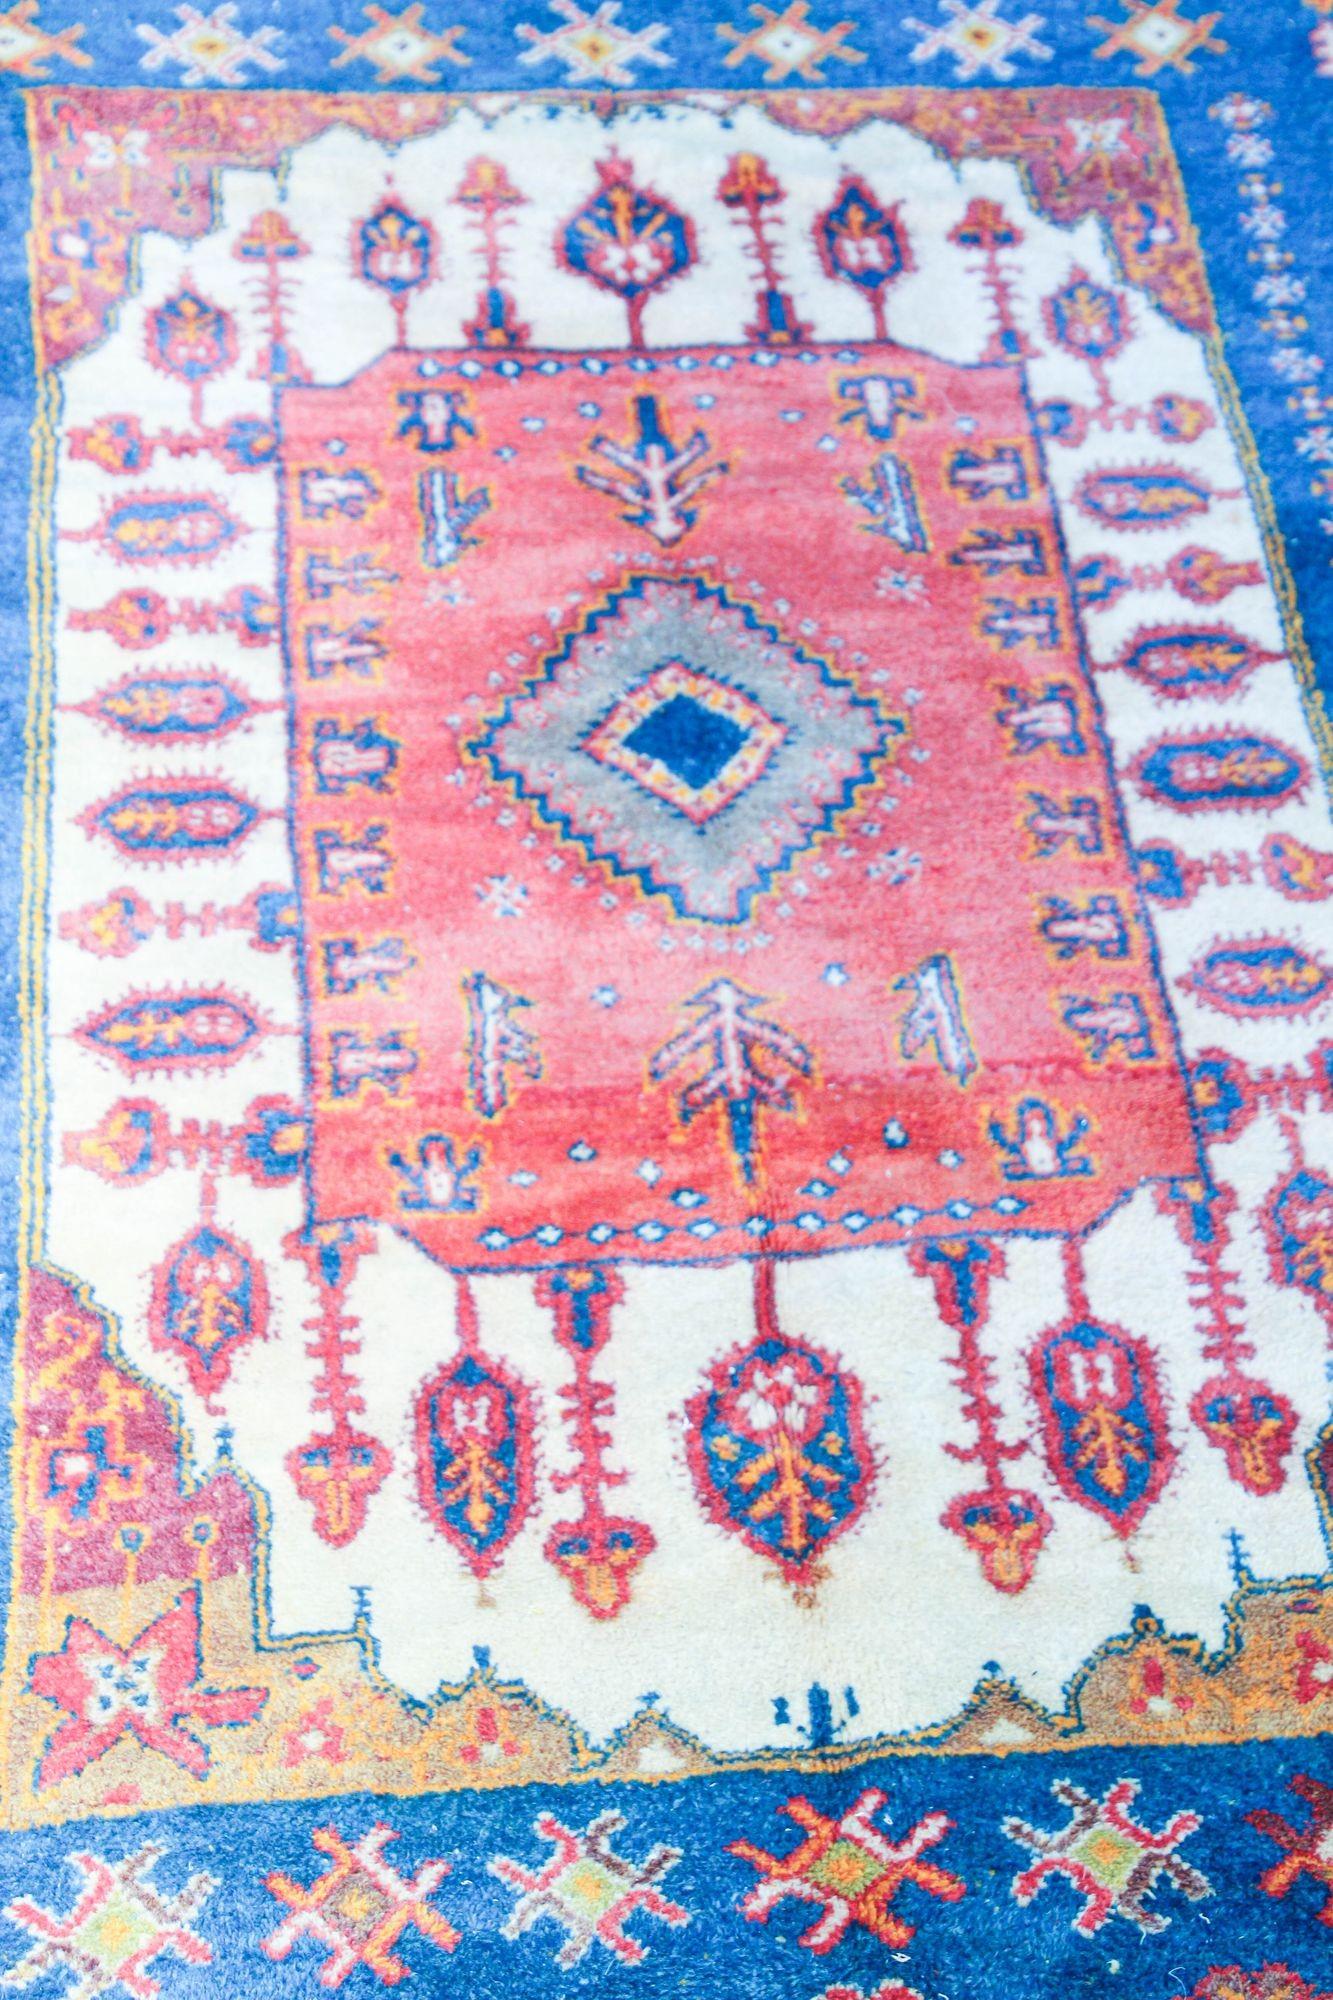 1960s Moroccan Berber Rug in Royal Blue, Pink and Orange Colors For Sale 7